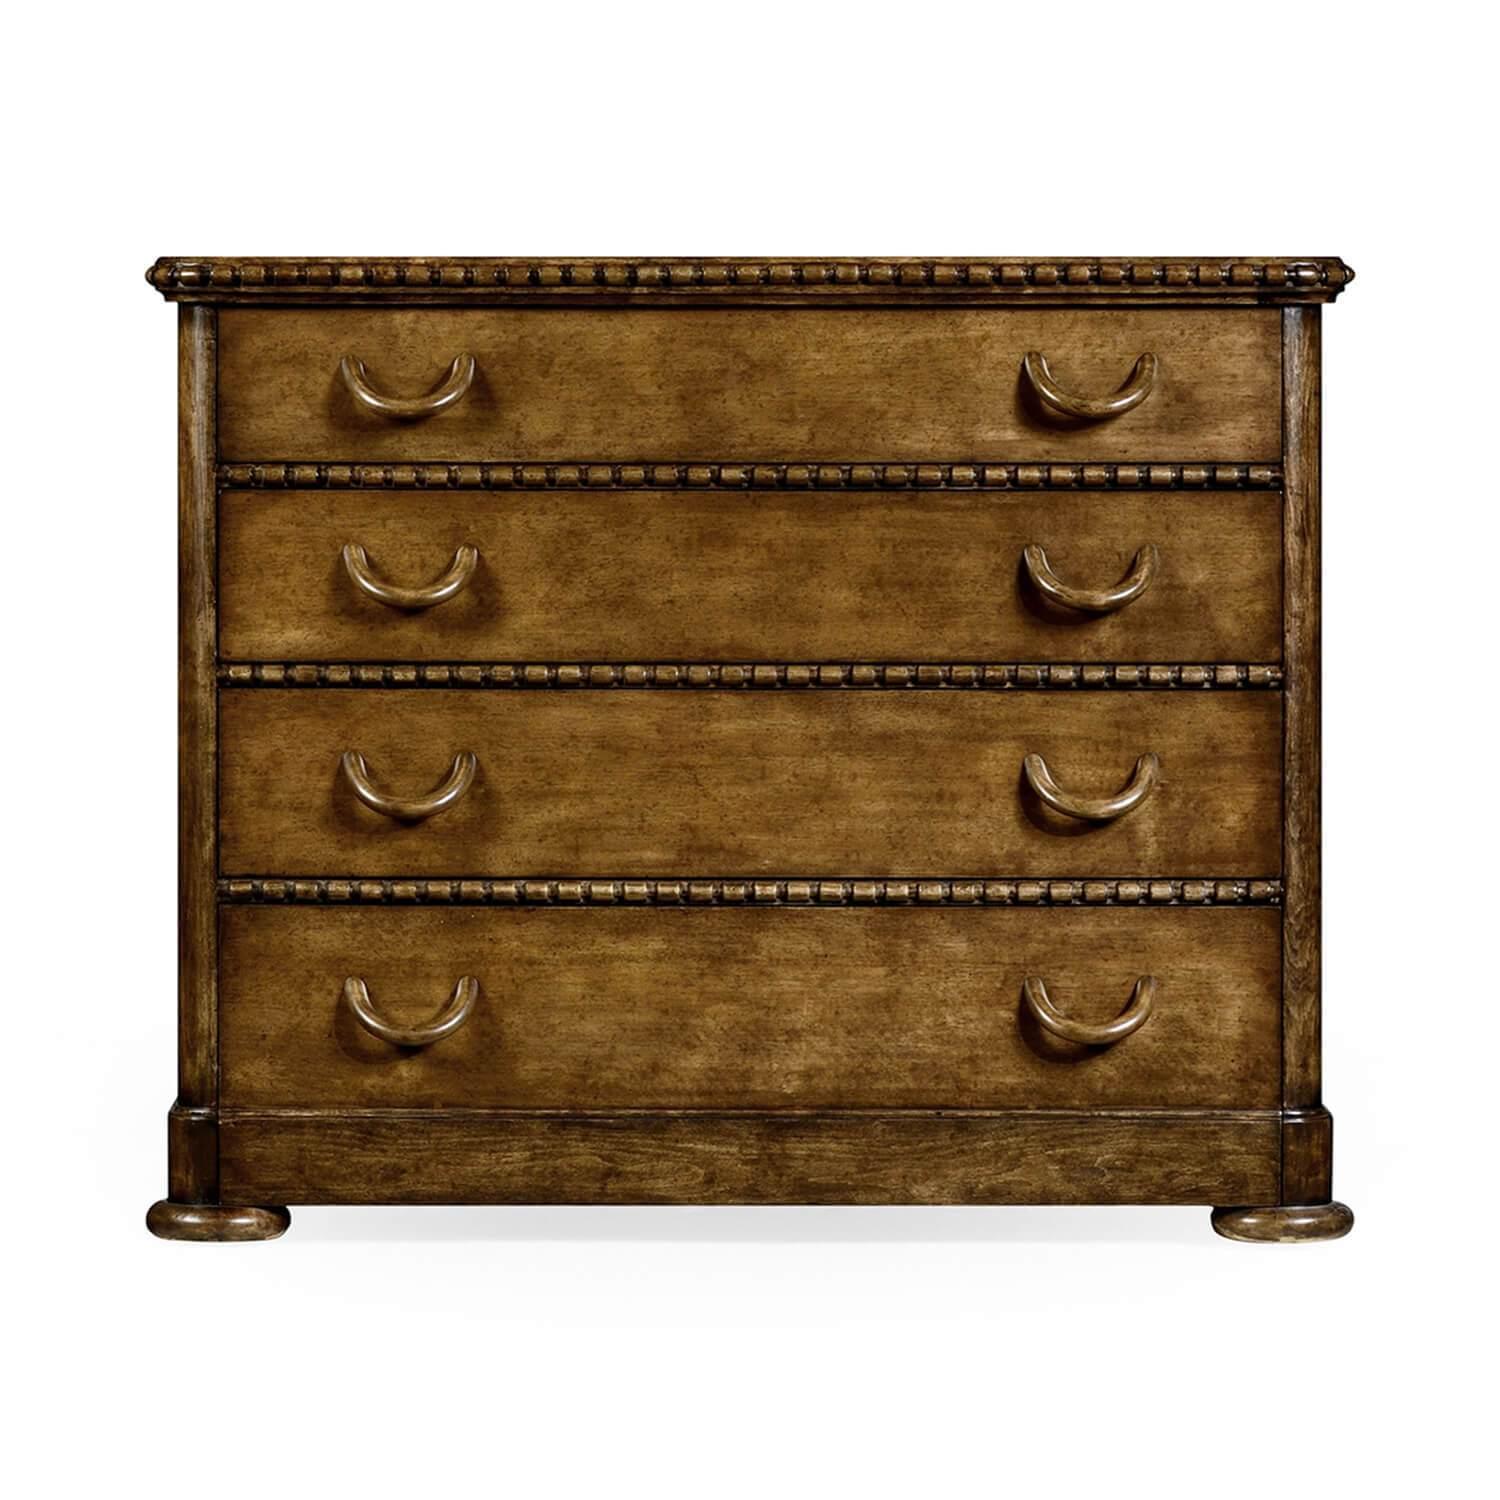 An unusual Aberfoyle (Scottish) greyed fruitwood chest of drawers. With a ribbon carved and molded edge, four graduated drawers with unique drop handles and raised on flattened melon feet.

Dimensions: 43 1/4